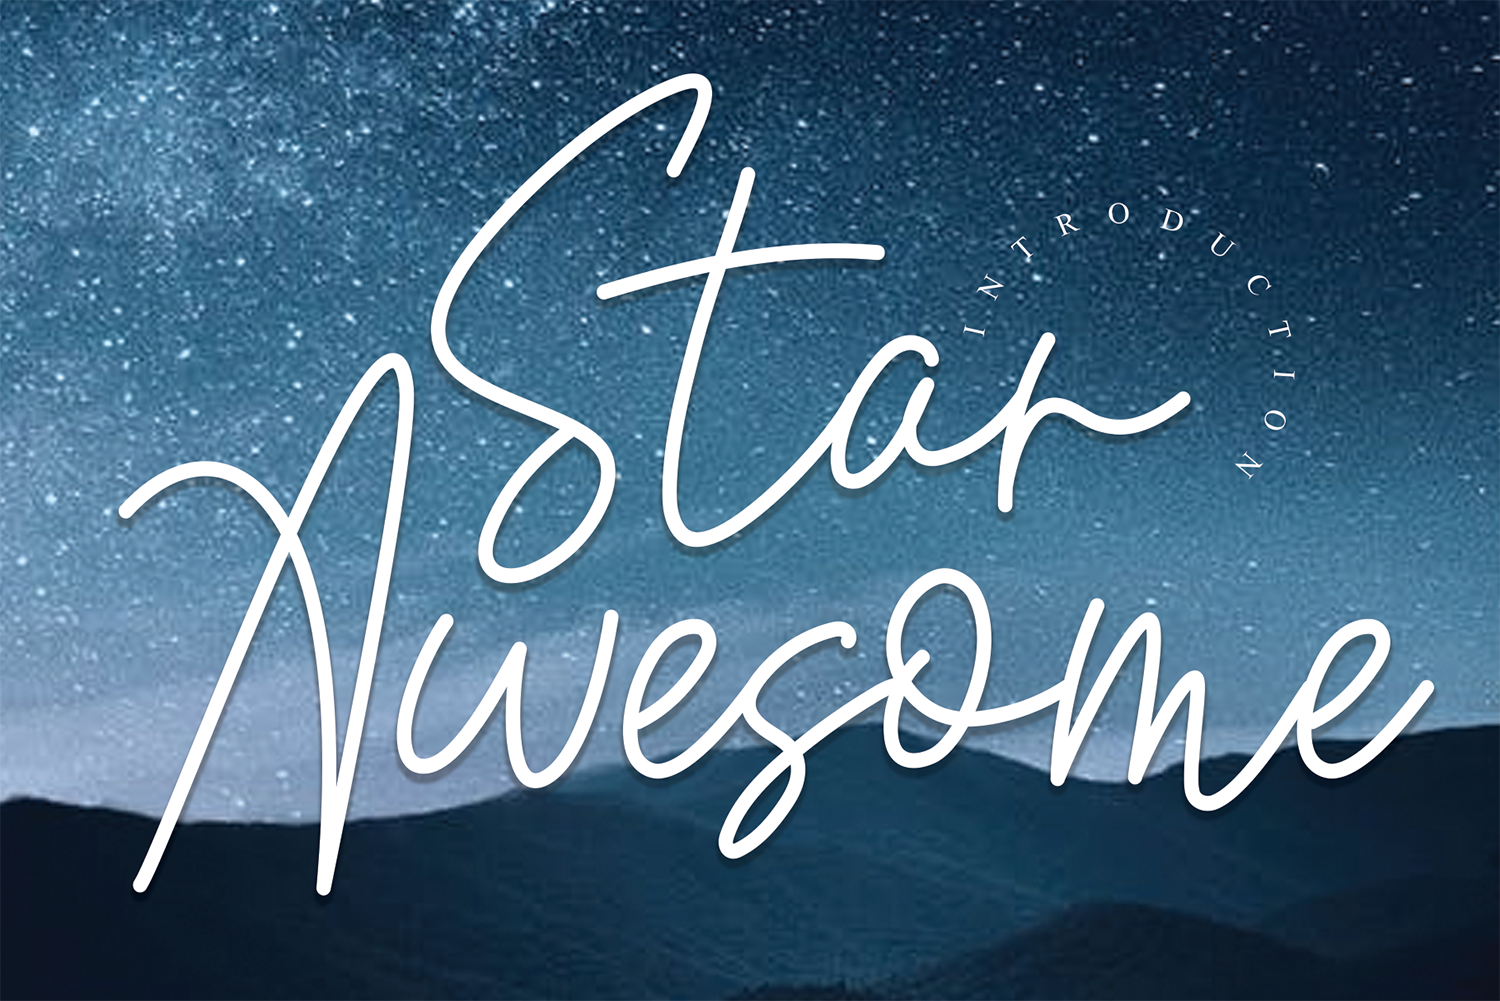 Star Awesome Free Font